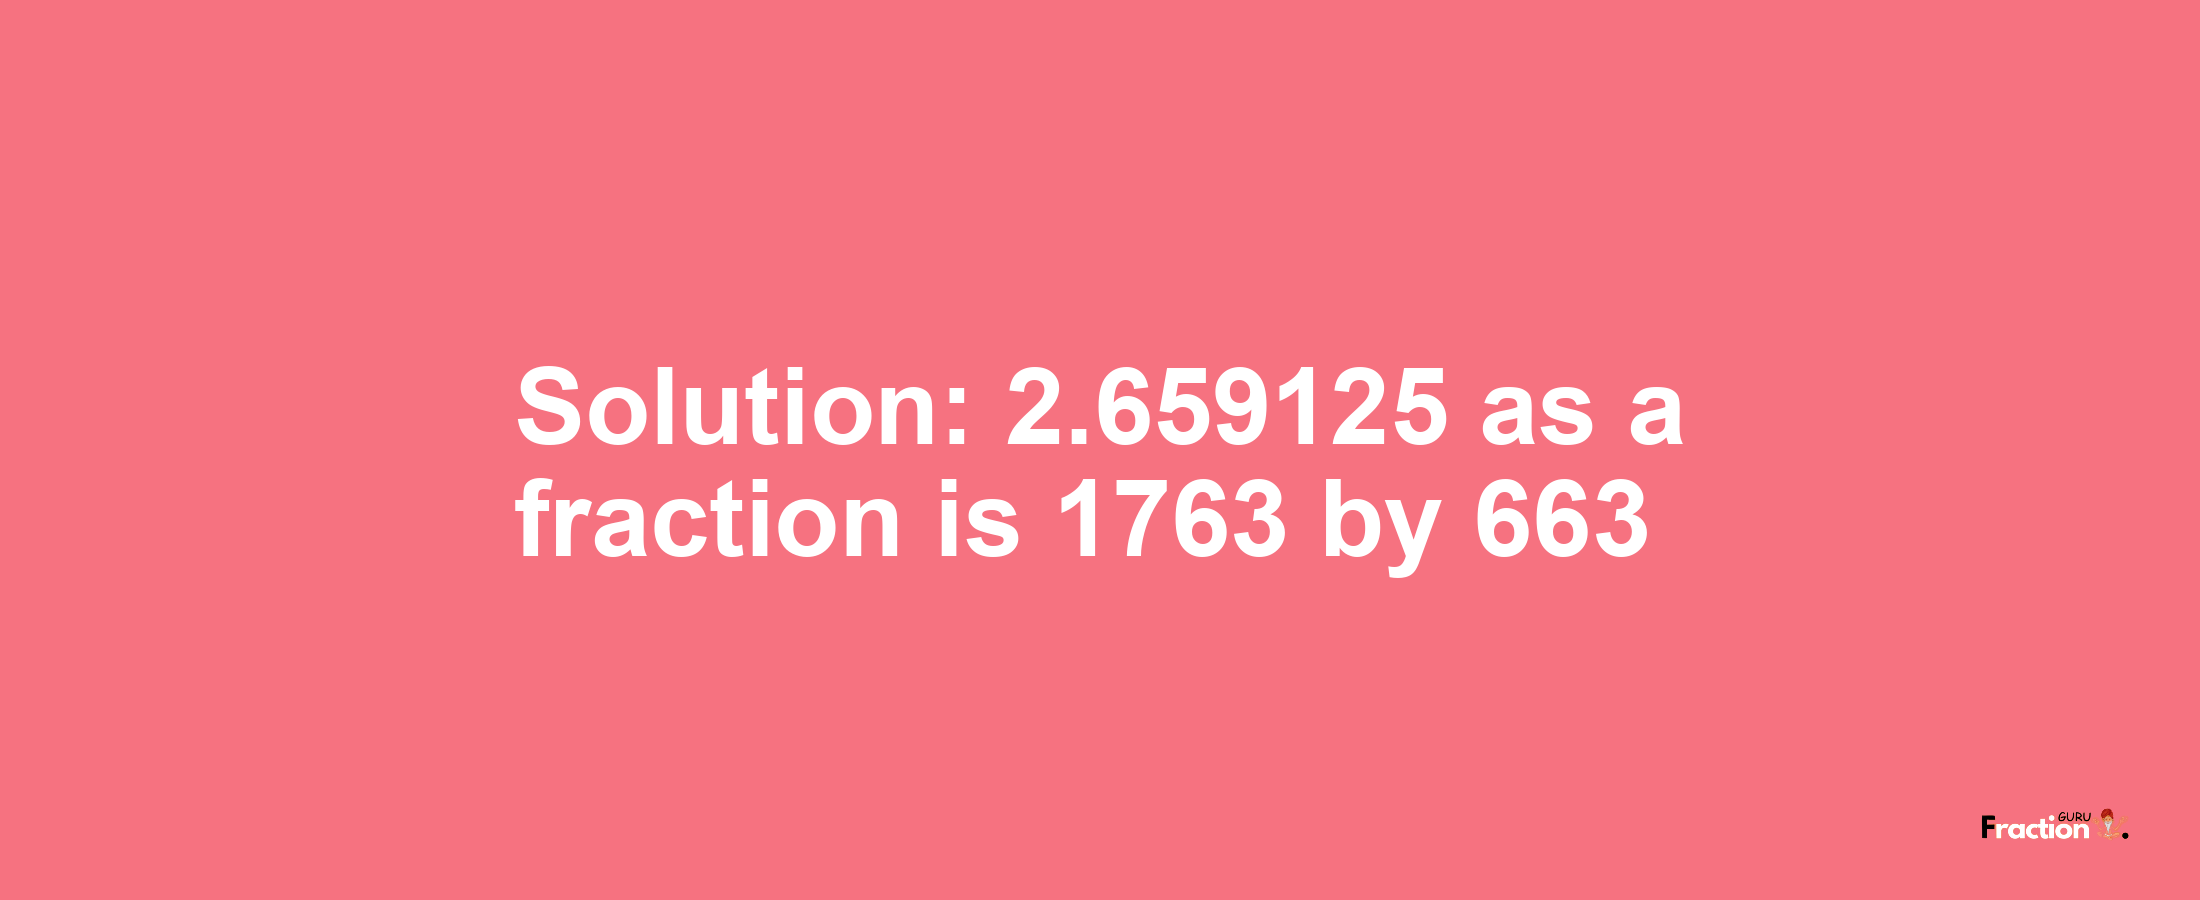 Solution:2.659125 as a fraction is 1763/663